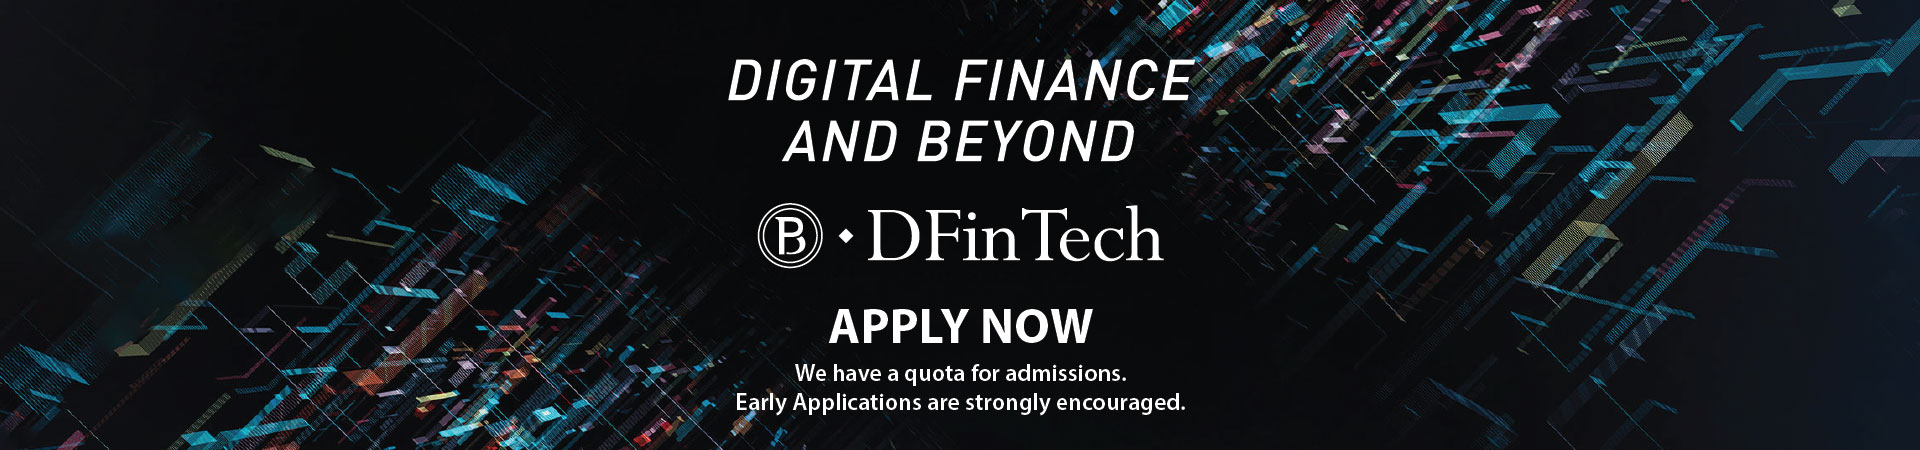 dfintech_banner_1920x450_new_image_apply_now